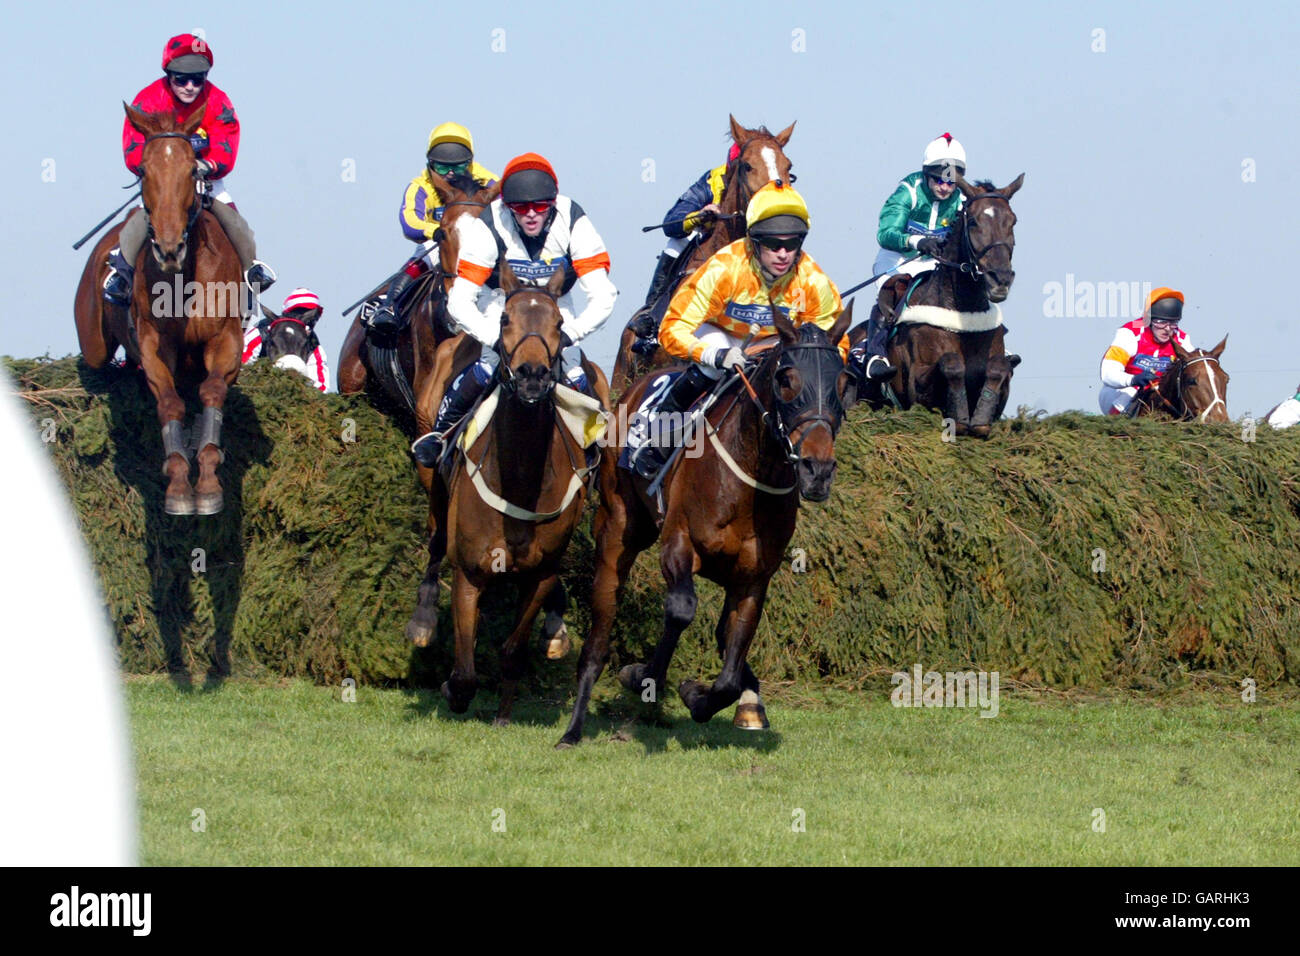 Horses make it over the chair safely (l-r Cregg House ridden by David Casey, Tremallt ridden by John Maguire and Torduff Express ridden by Timmy Murphy) Stock Photo